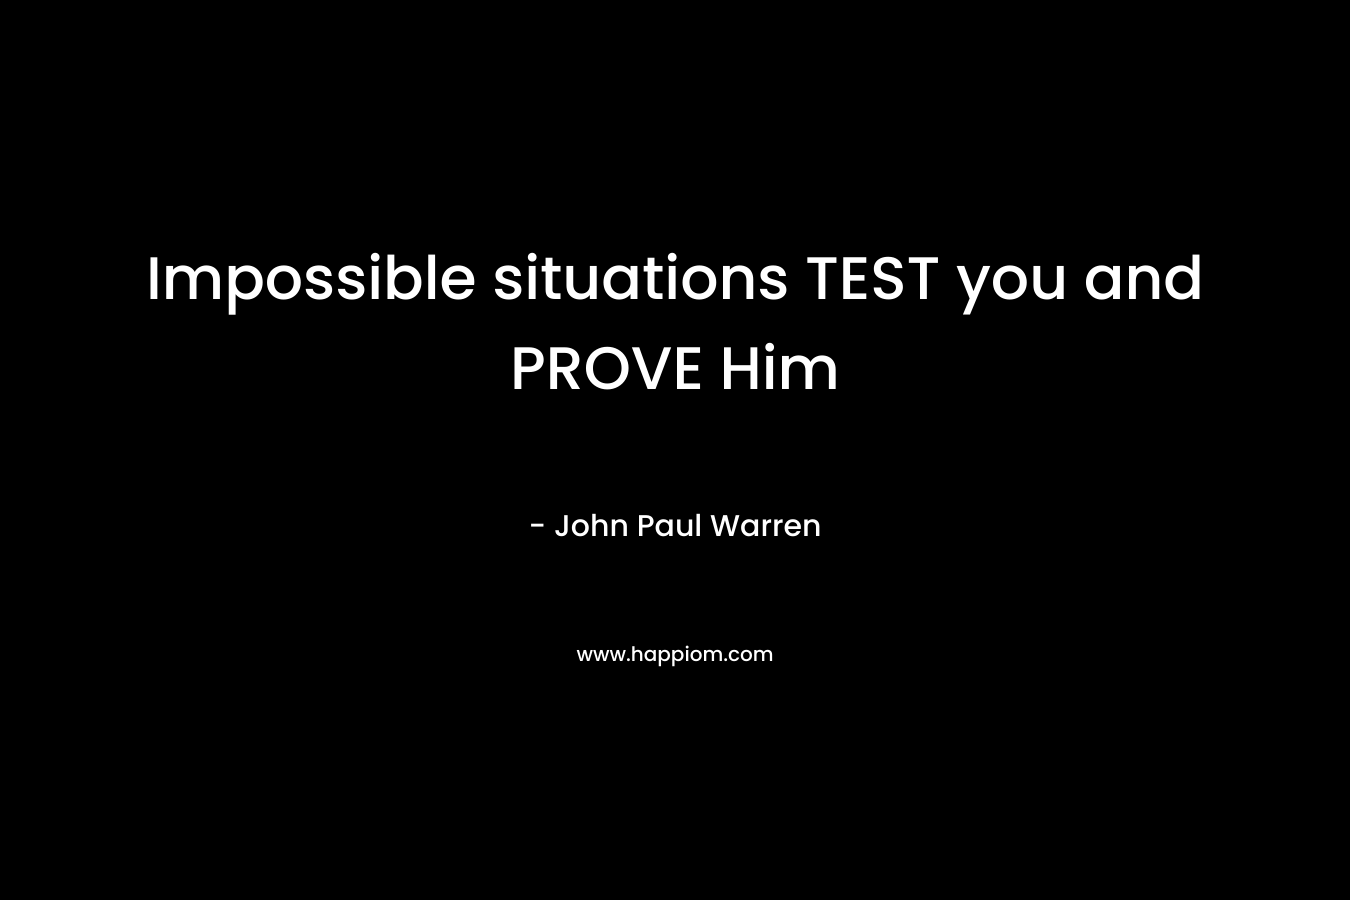 Impossible situations TEST you and PROVE Him